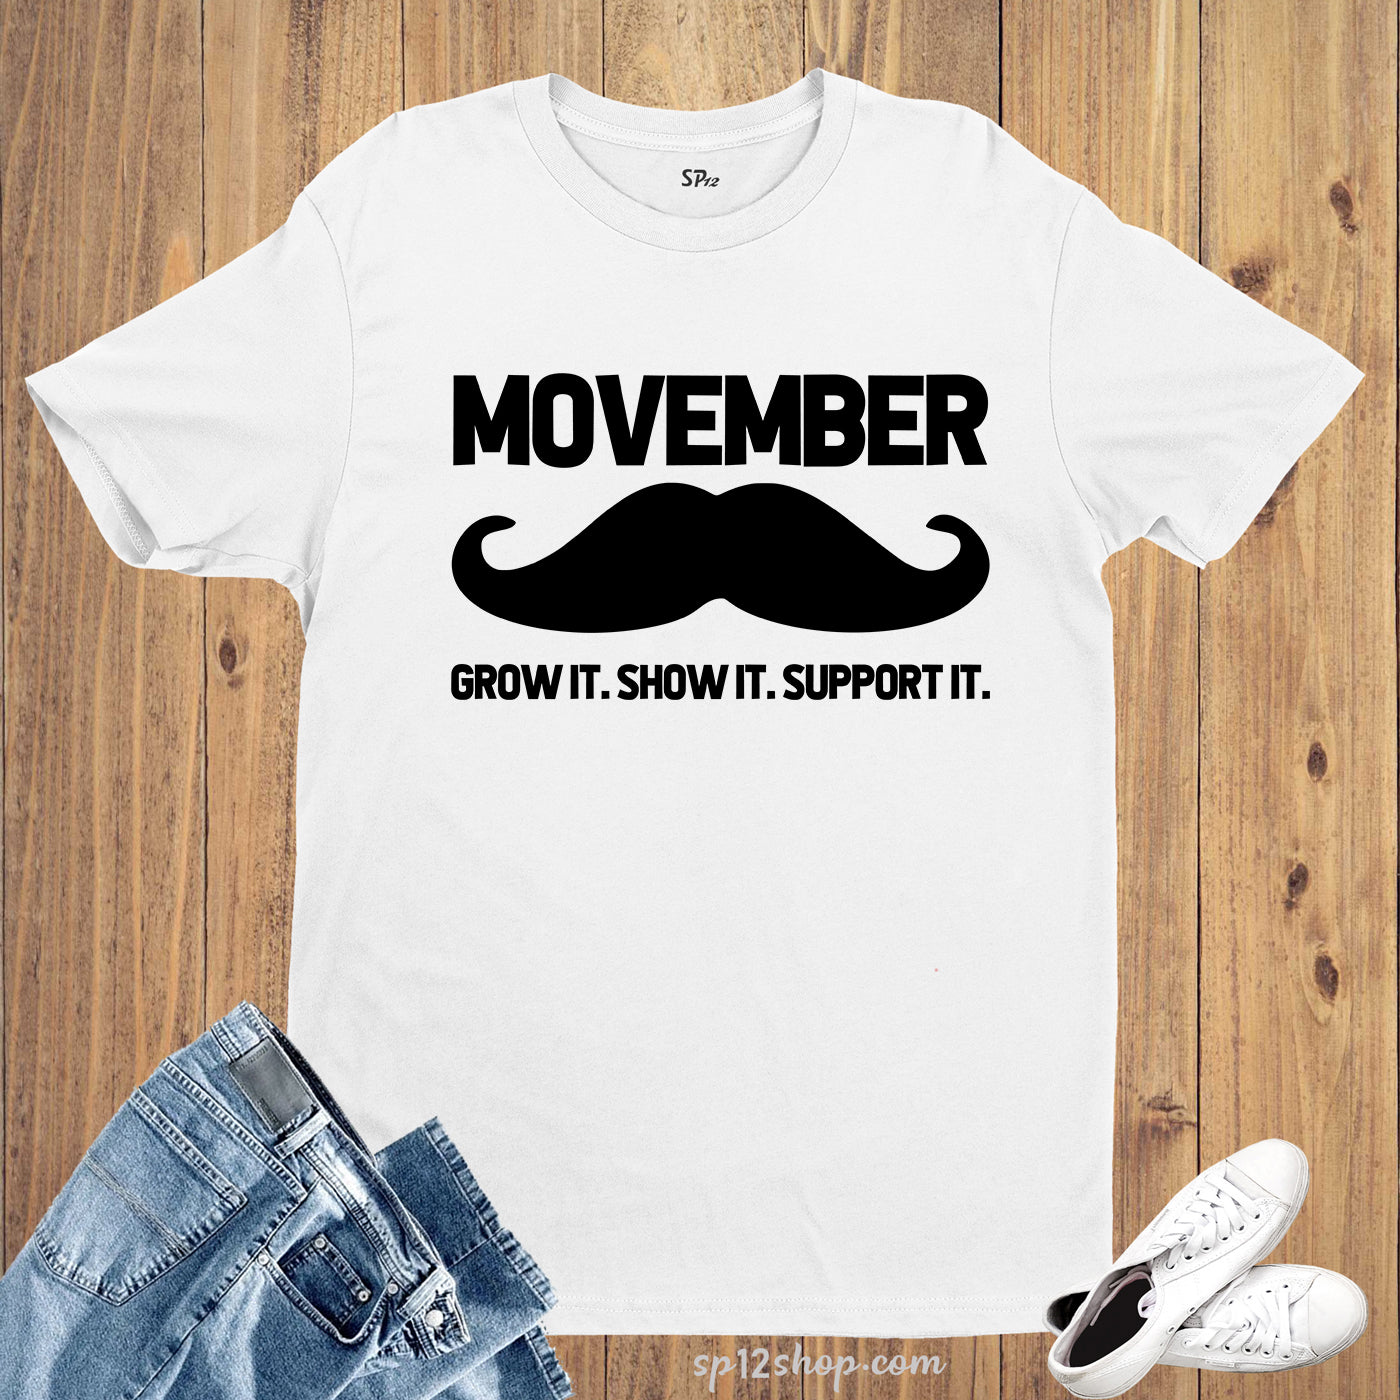 Movember Grow It Show It Support It T Shirt